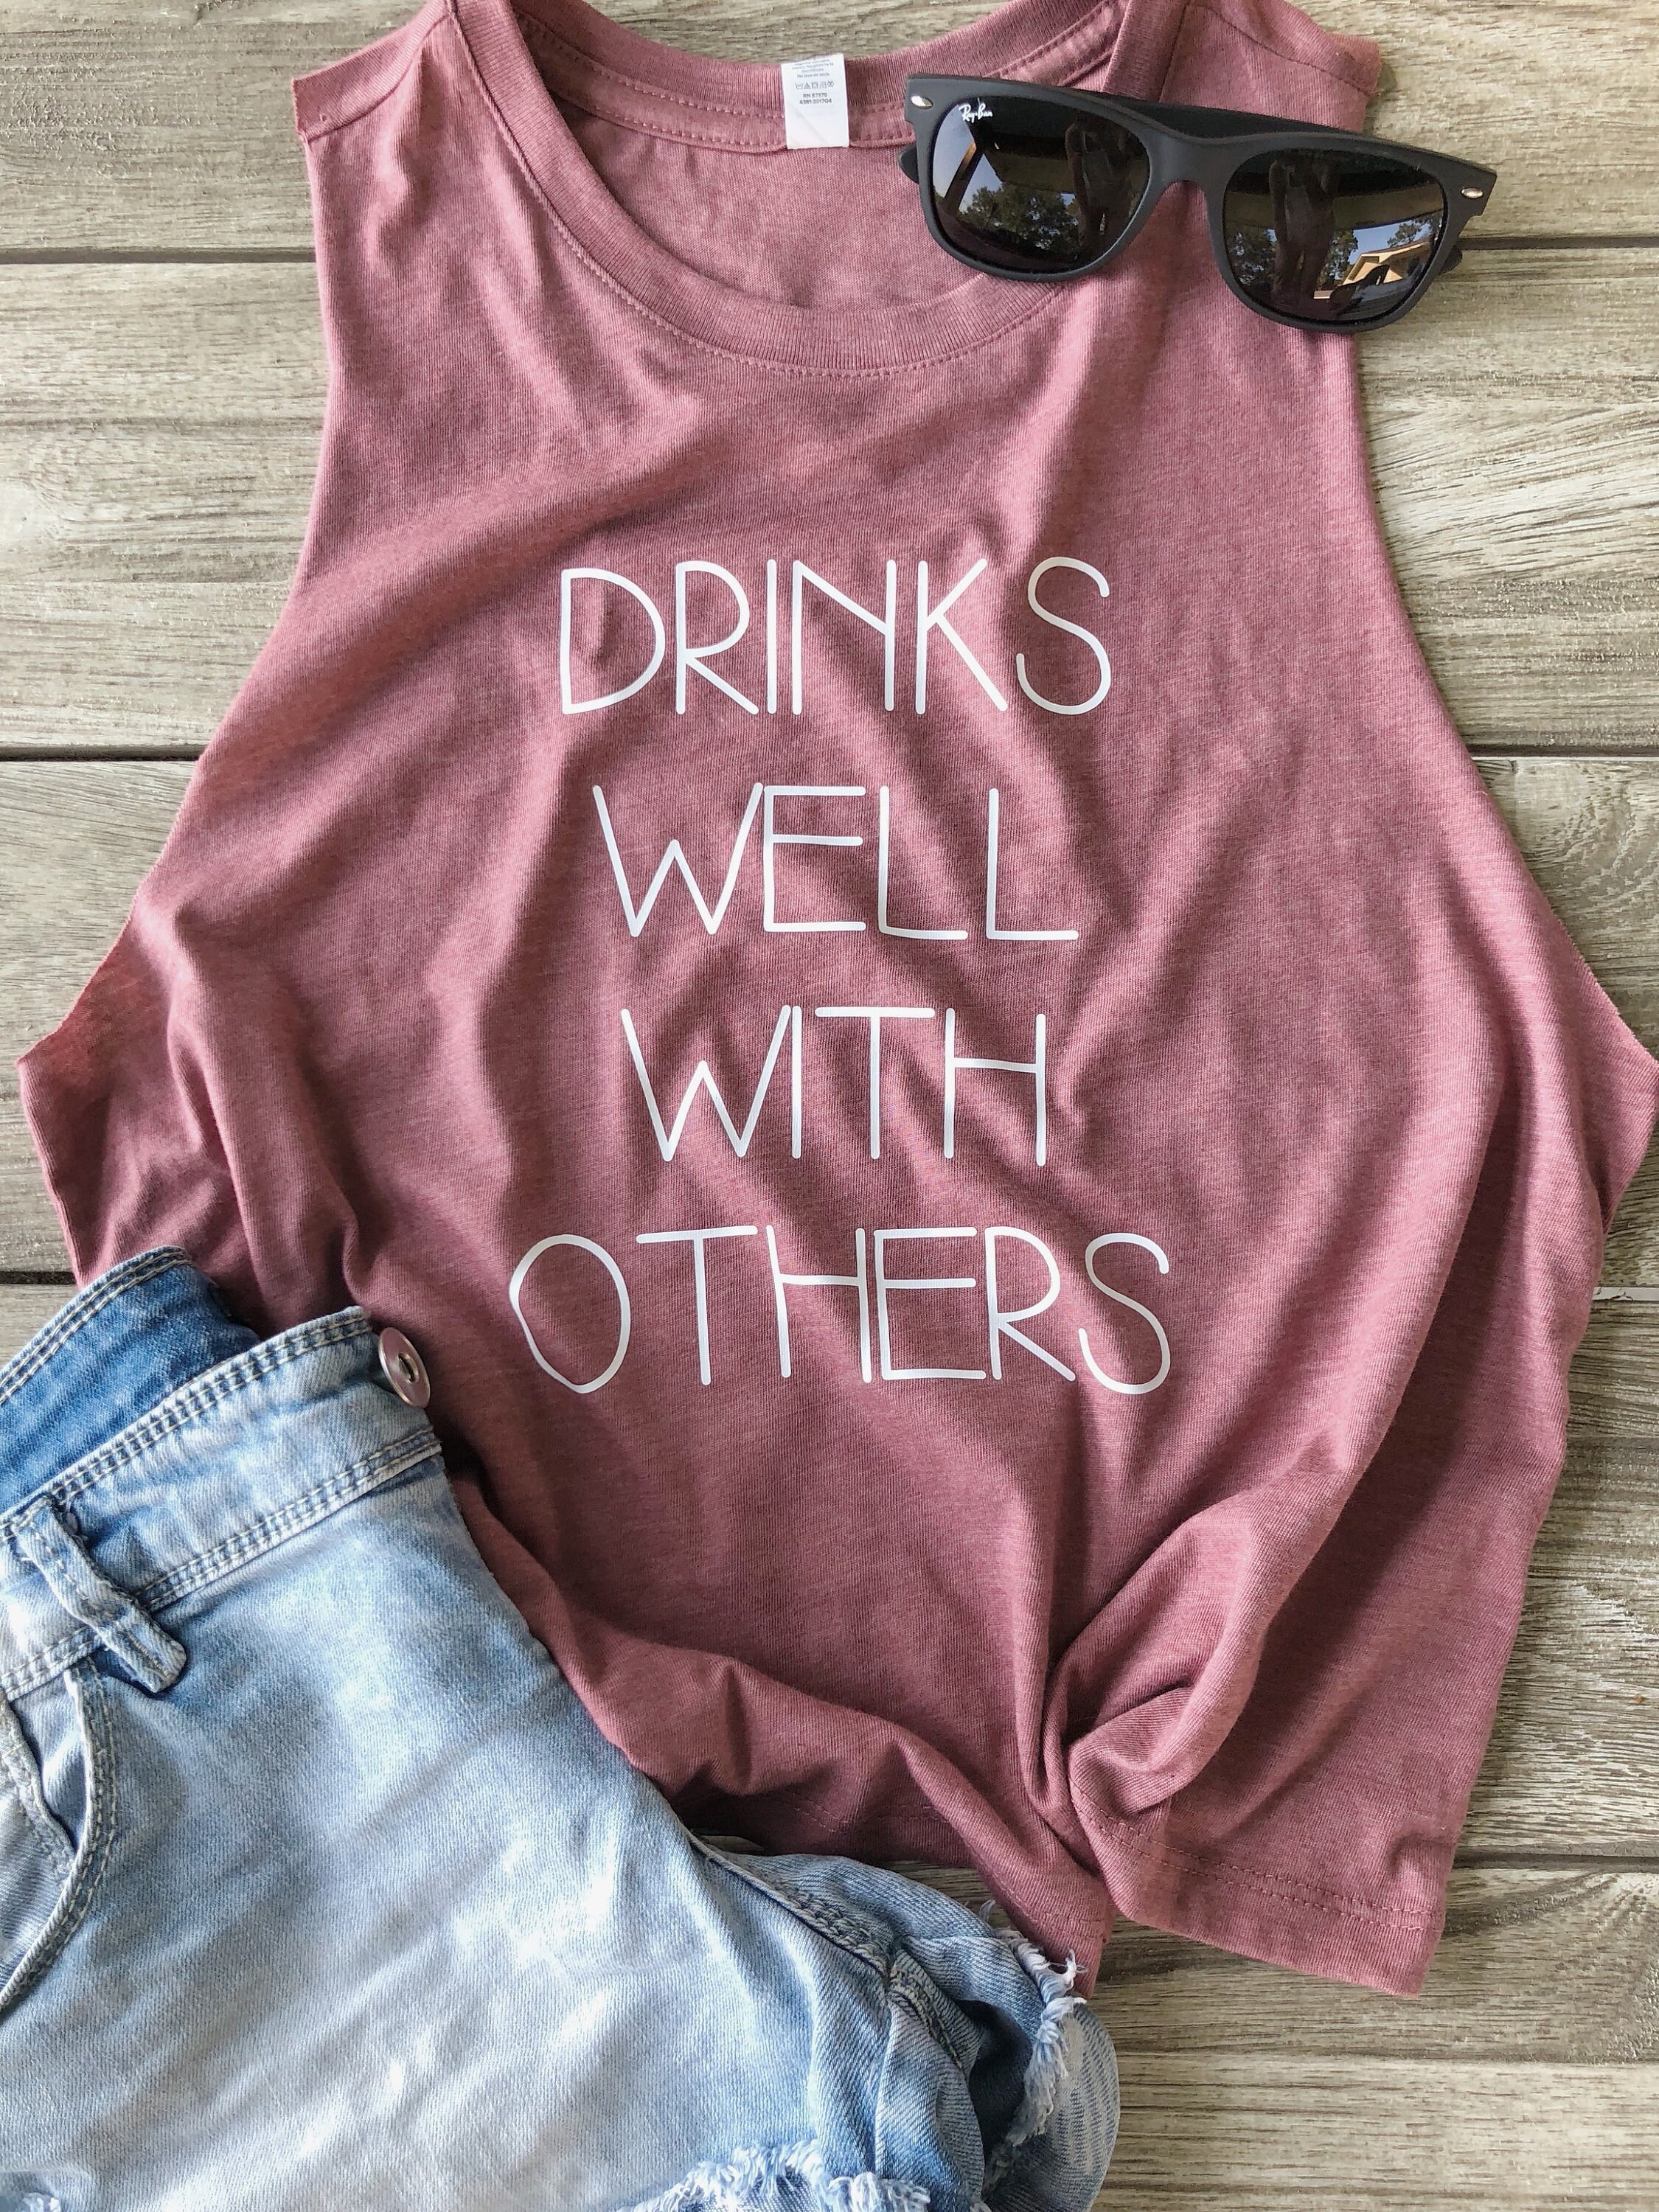 Drinks Well With Others Party Tank. Summer Crop Top. - Etsy